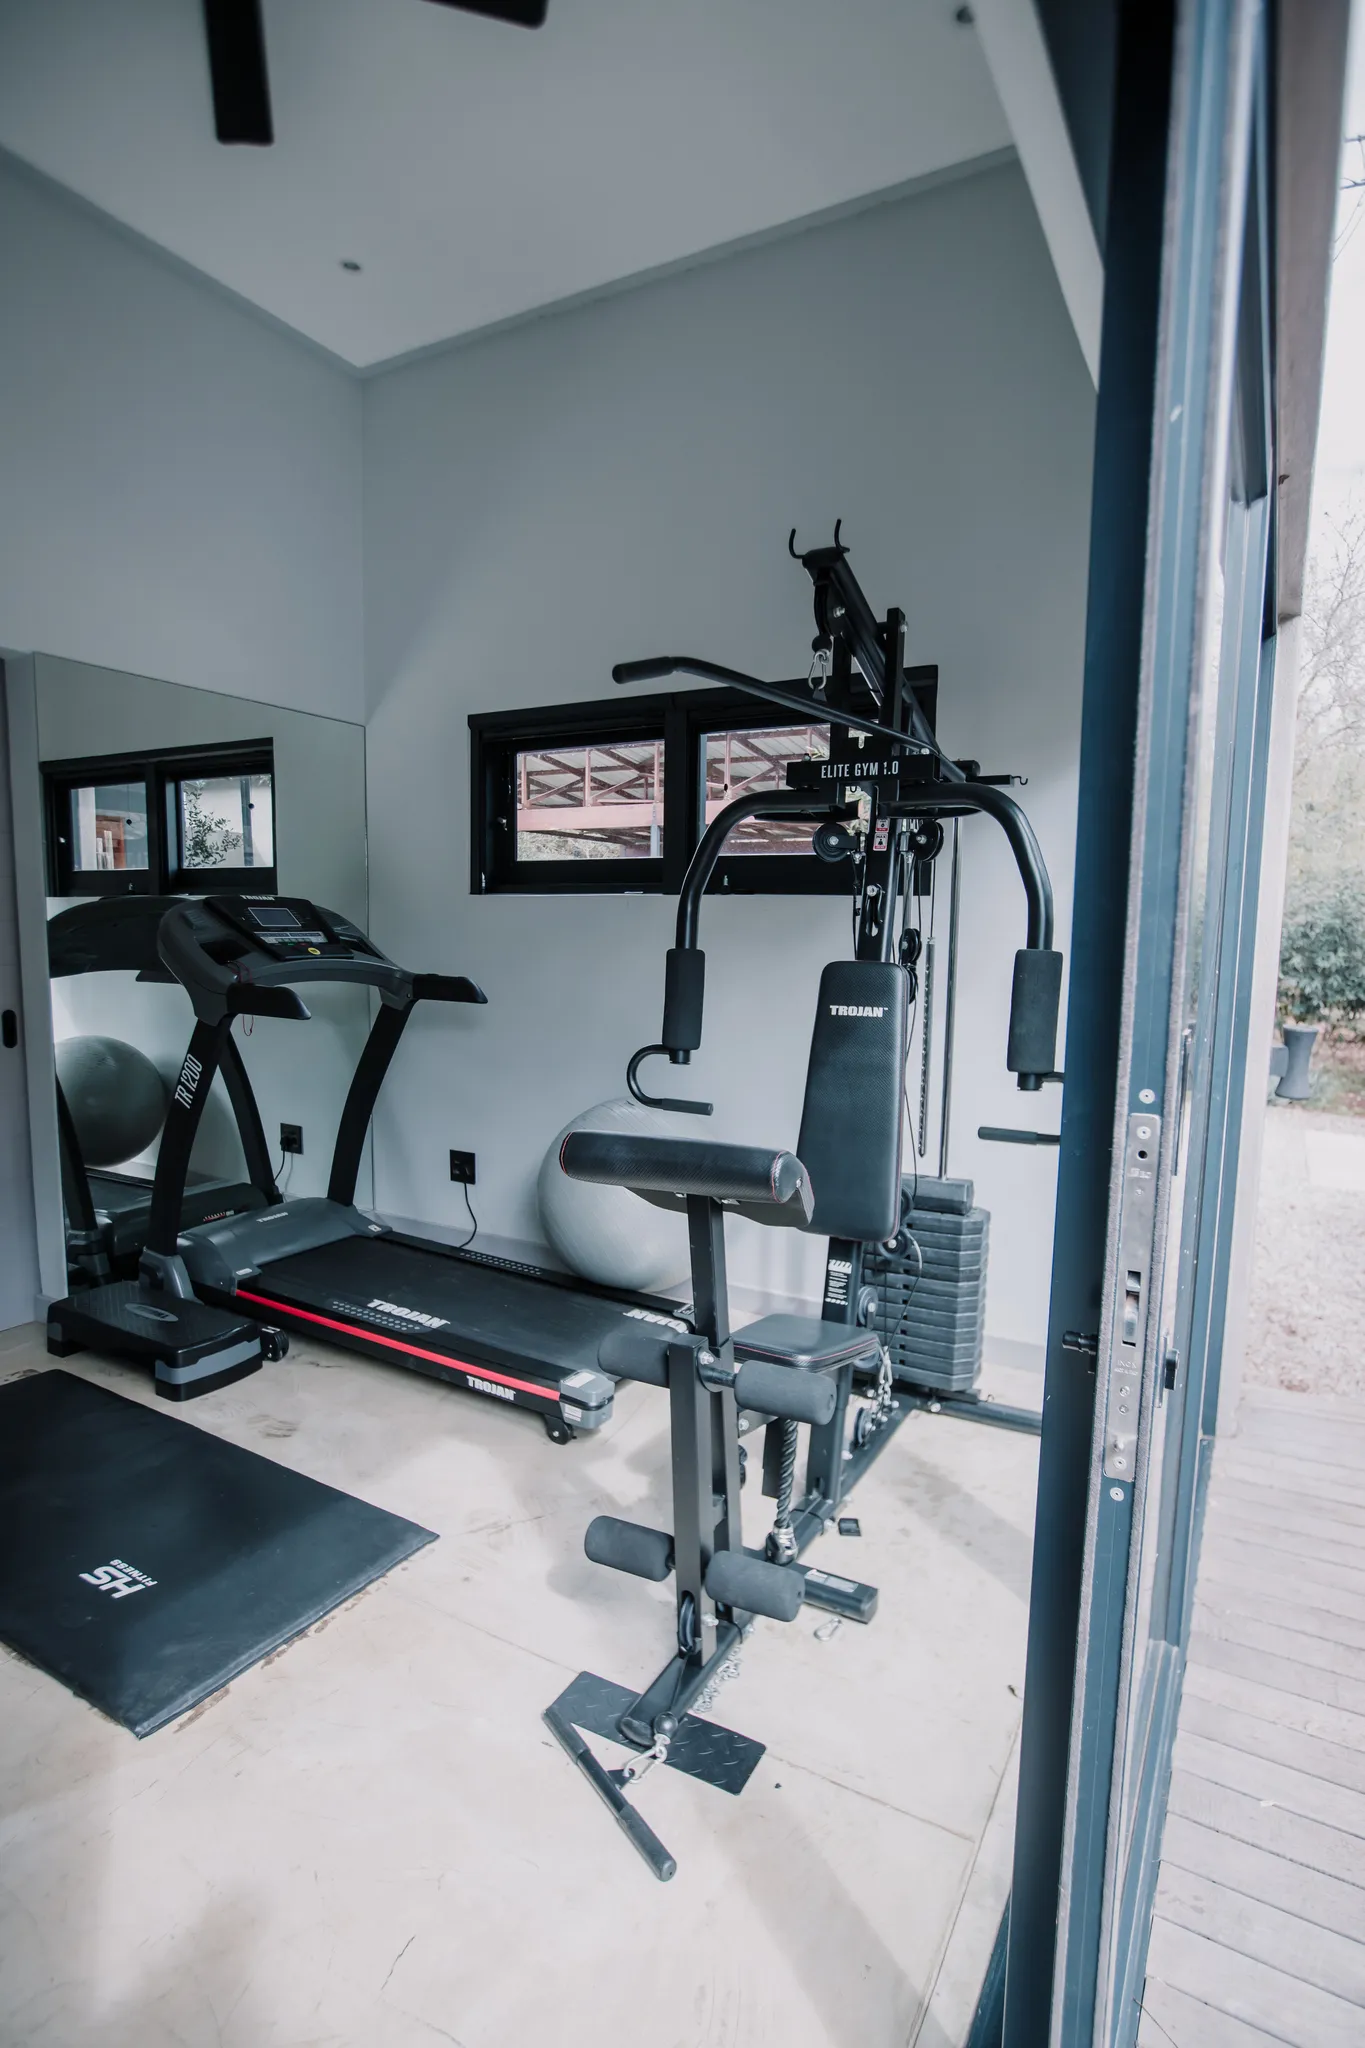 A home gym area with mutliple exercise machines.